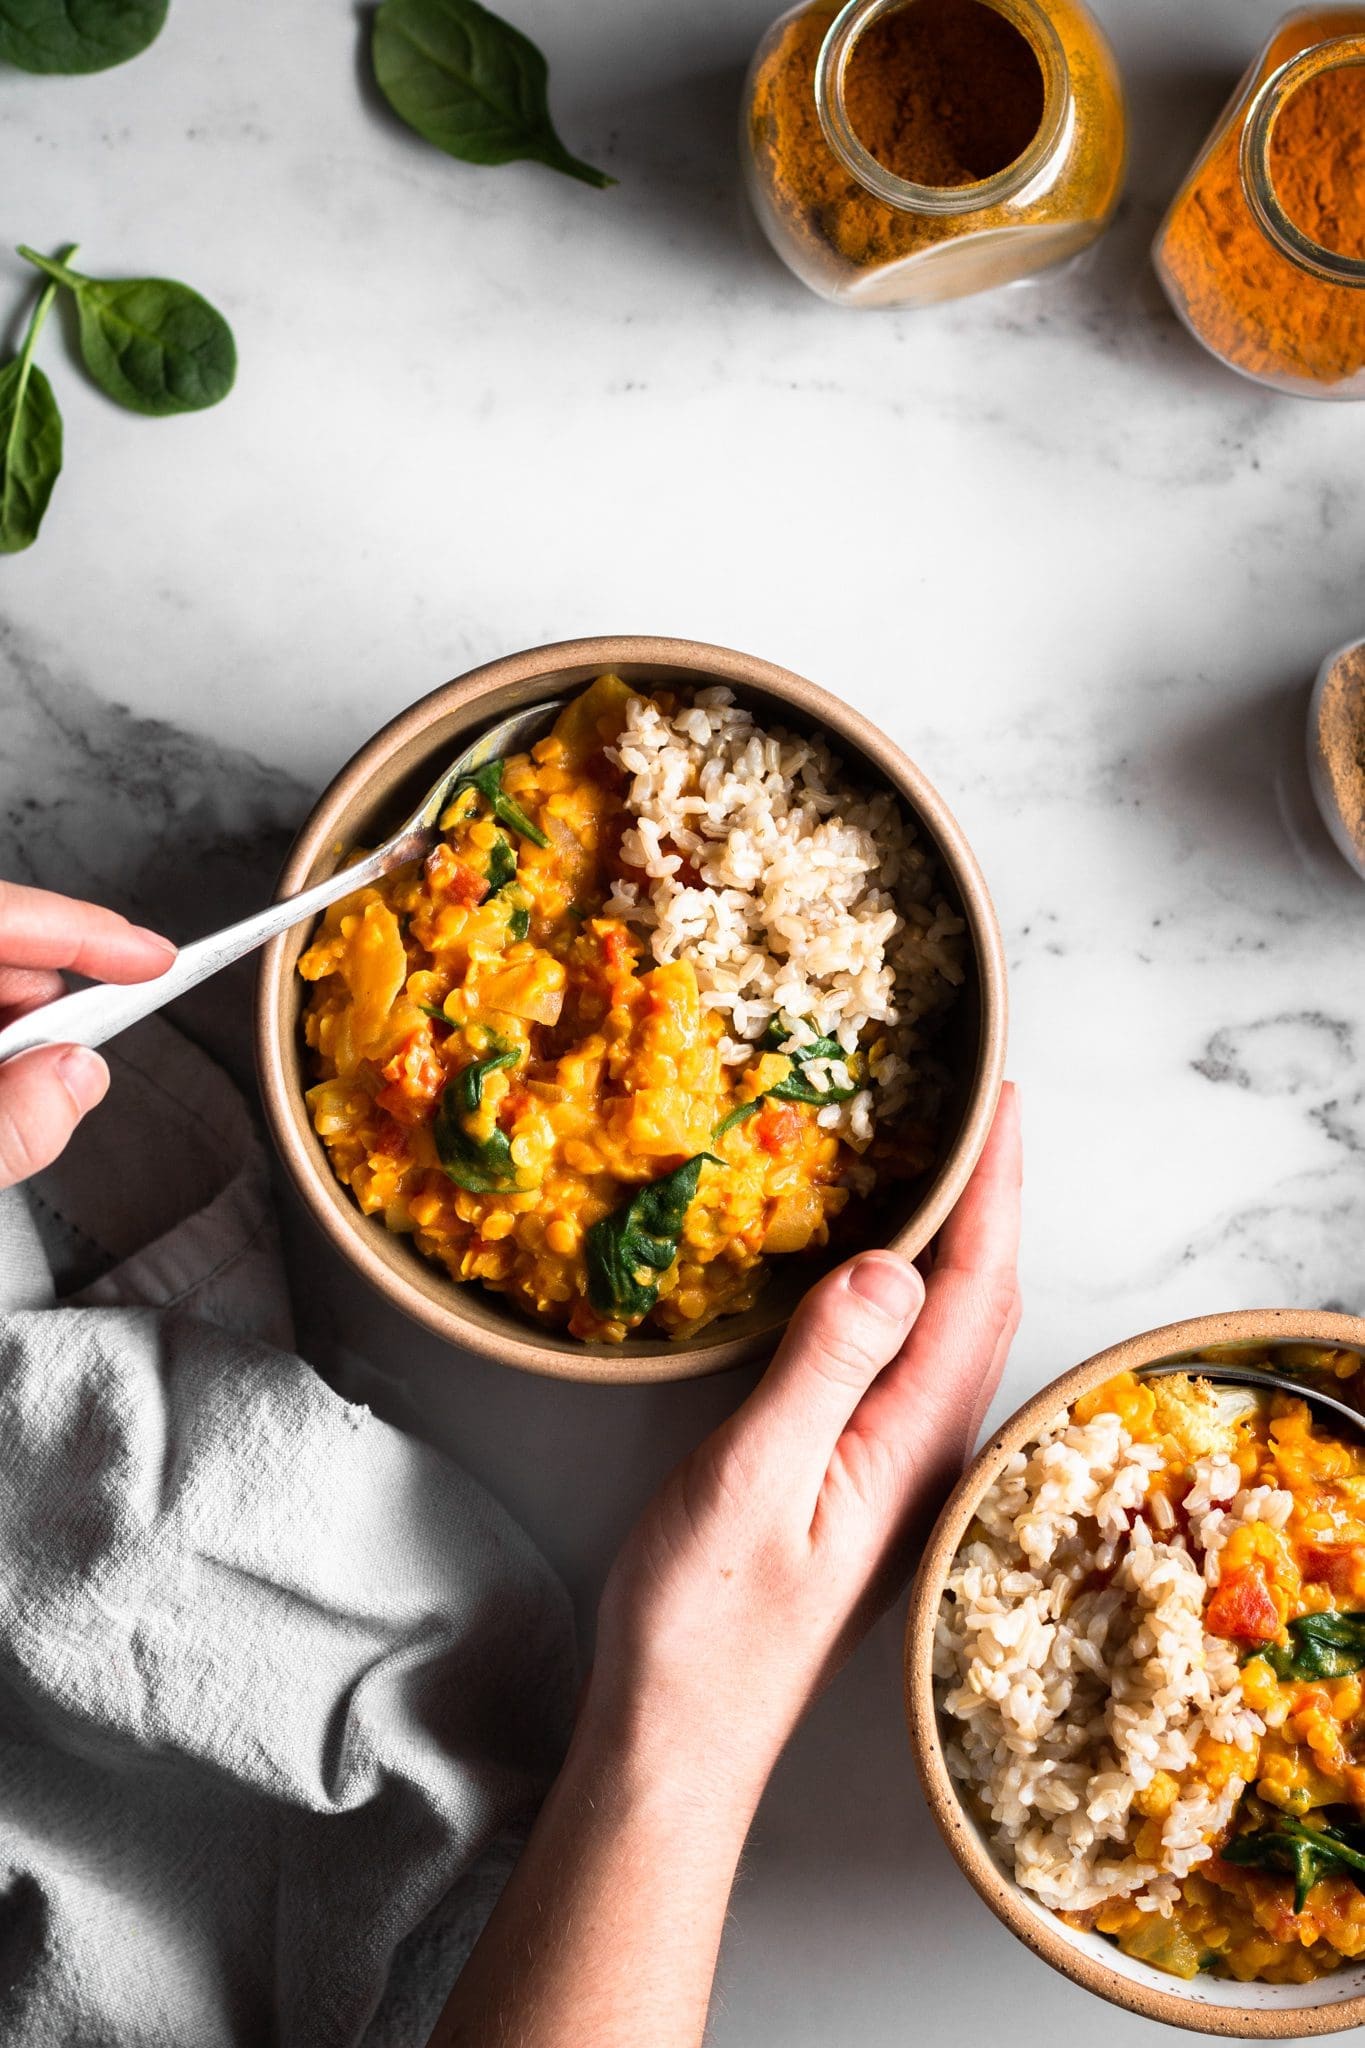 how to feel full on a vegan diet - bowl of curry with rice